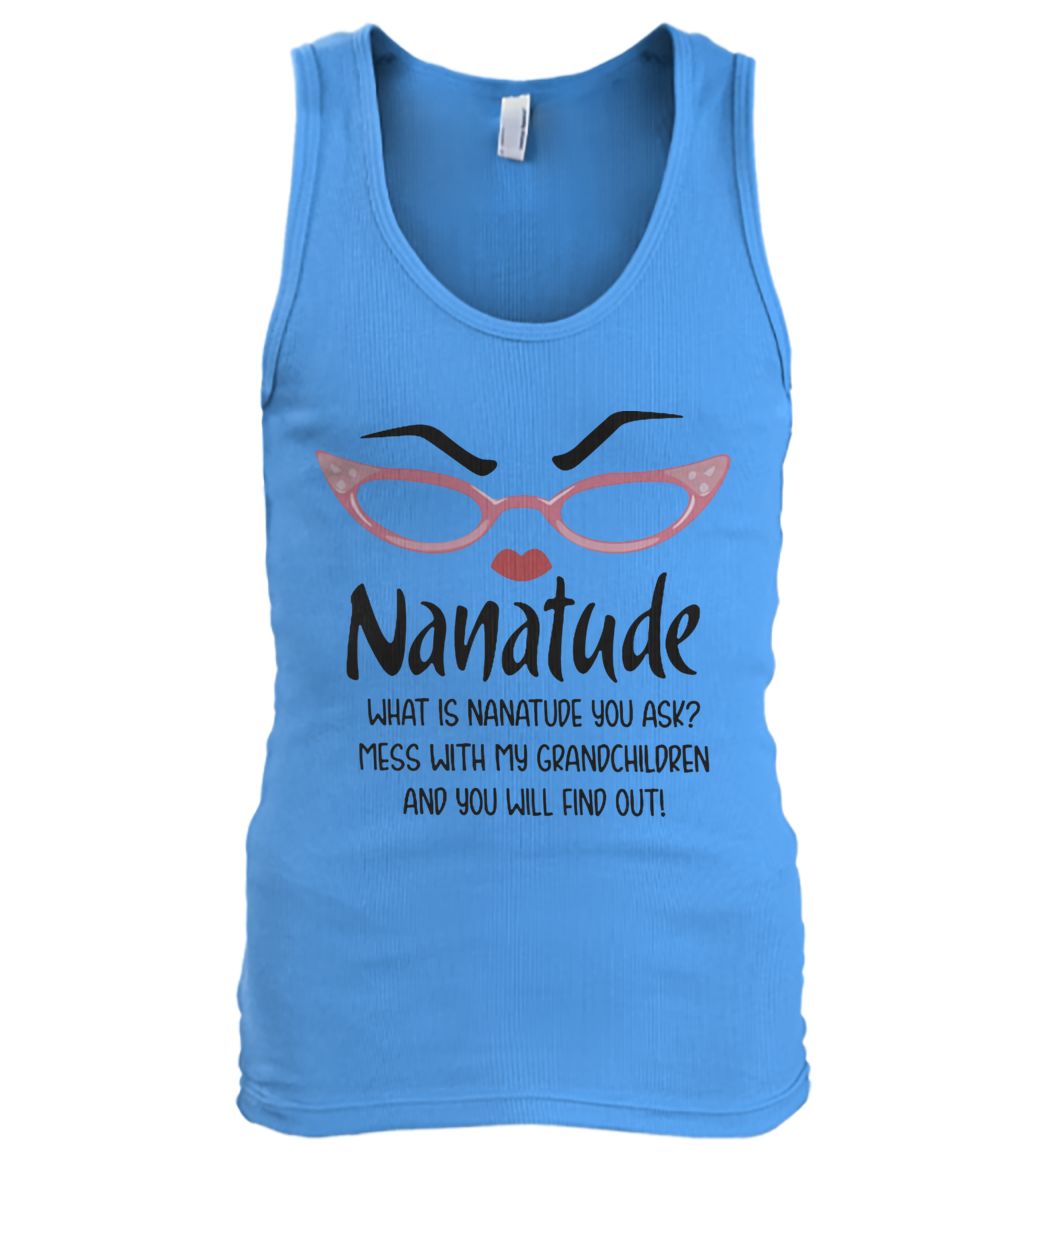 Nanatude what is nanatude you ask mess with my grandchildren and you will find out men's tank top